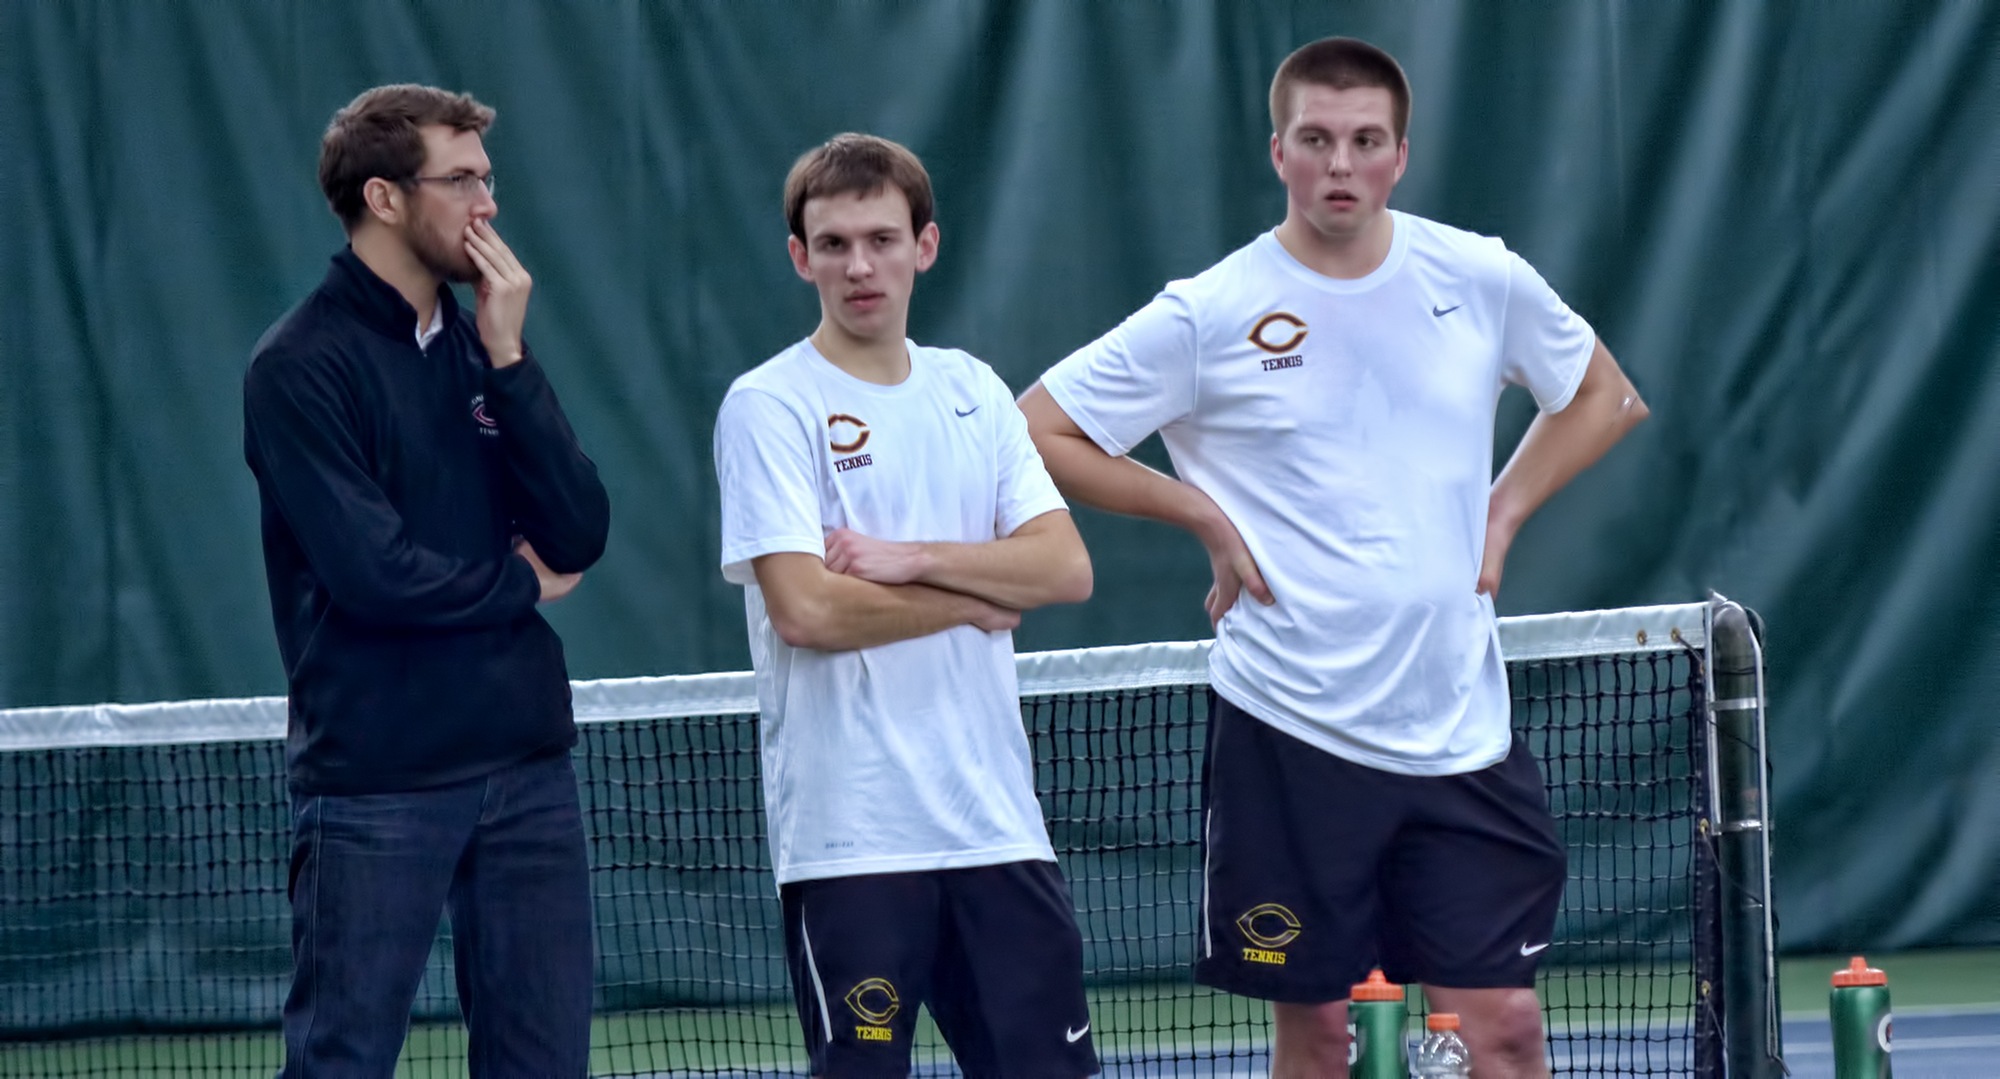 David Youngs (L) and Isaac Toivonen picked up where they left off last year after their All-Conference play as they won 8-3 at No.1 singles and helped the Cobbers beat St. Scholastica 8-1.